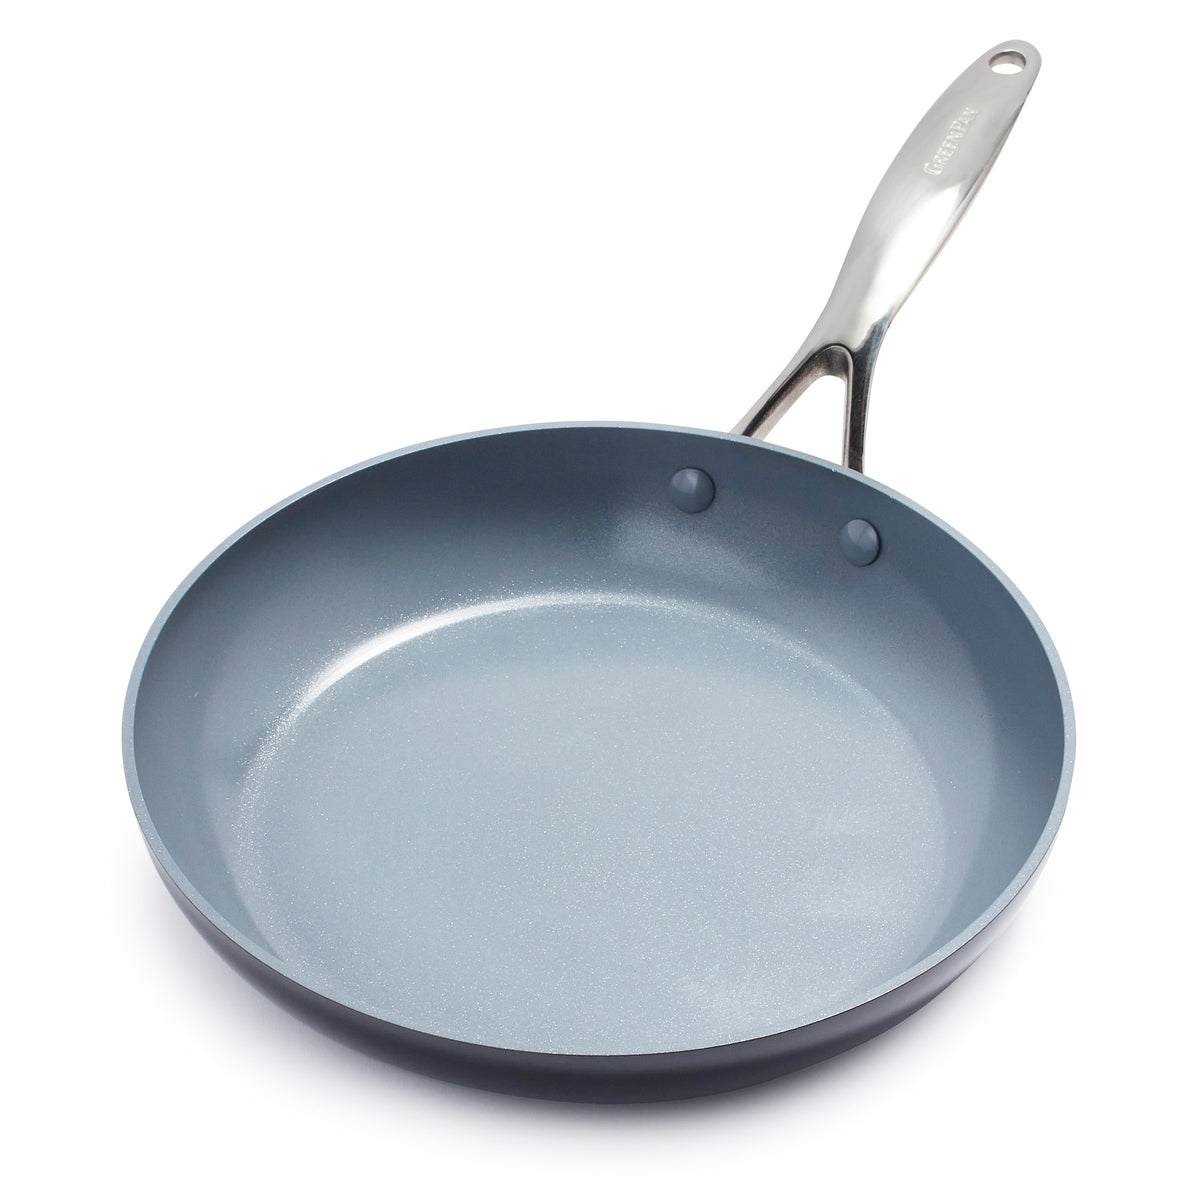 Recommended non-stick pan American